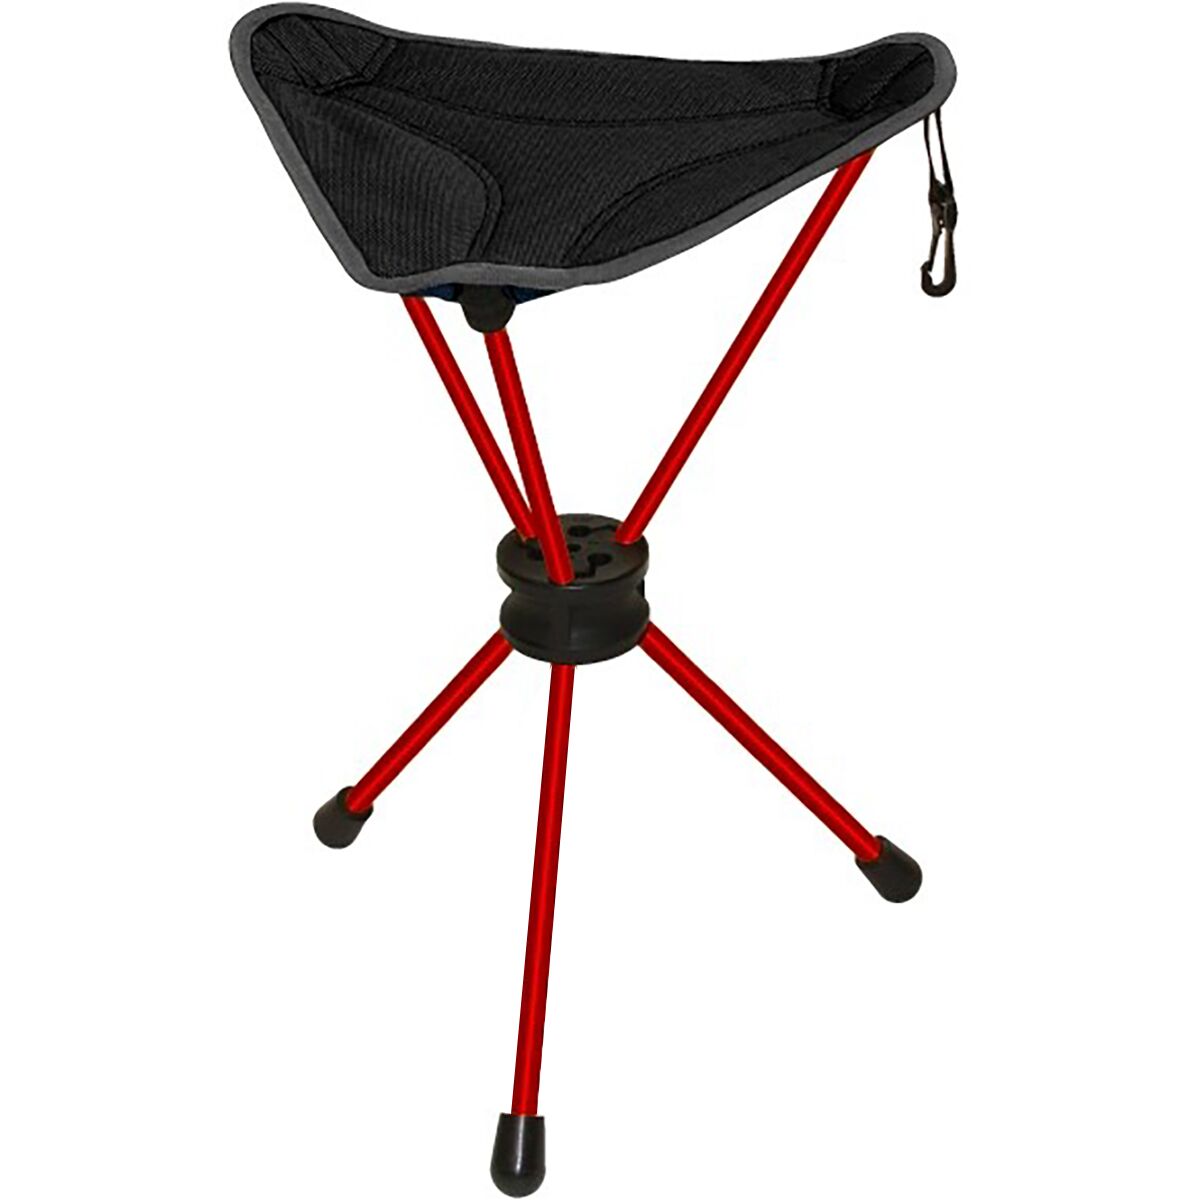 TRAVELCHAIR PackTite Camp Chair